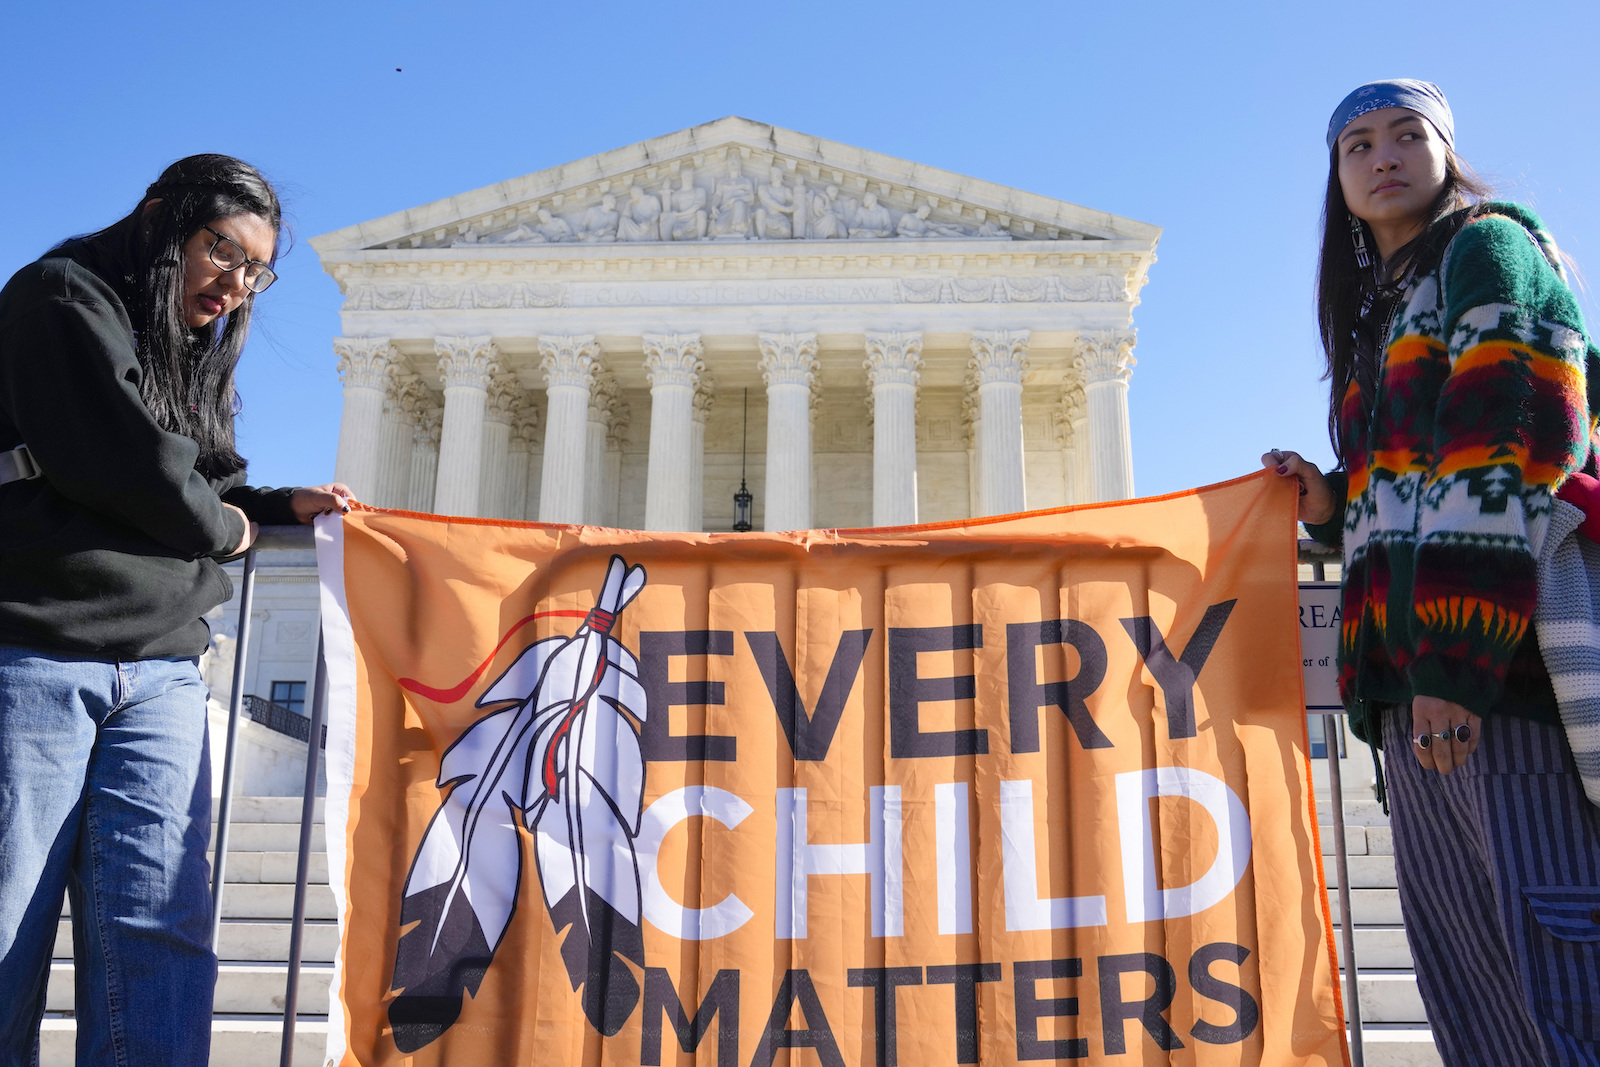 Demonstrators holding up a sign in front of the Supreme Court building saying "EVERY CHILD MATTERS"